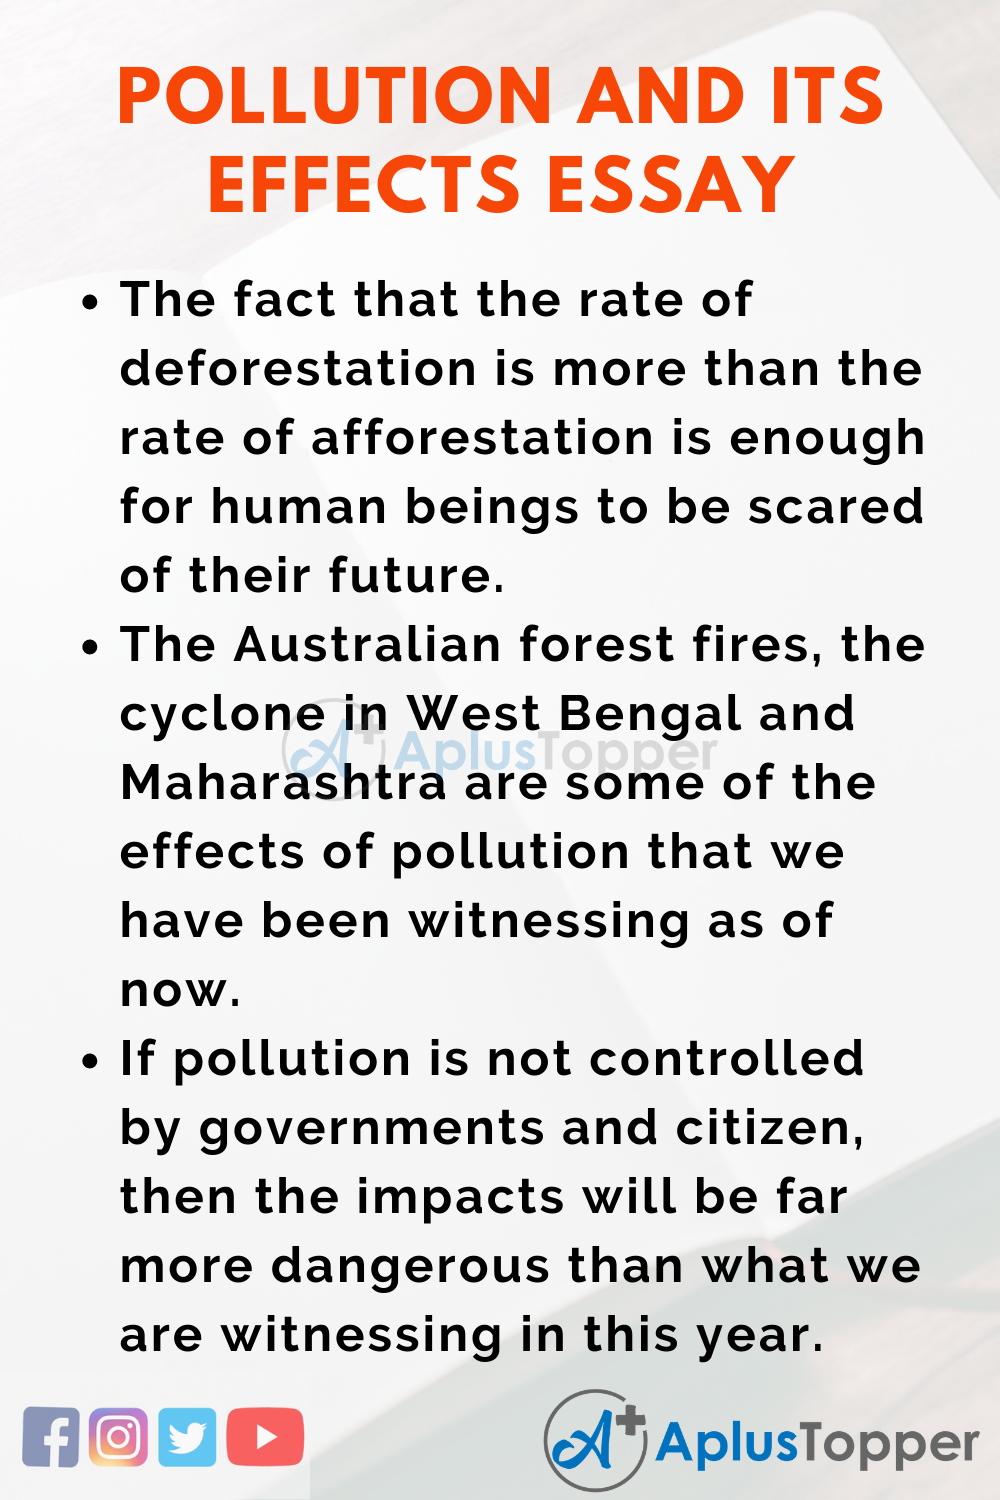 Short Essay on Pollution and Its Effects 200 Words in English